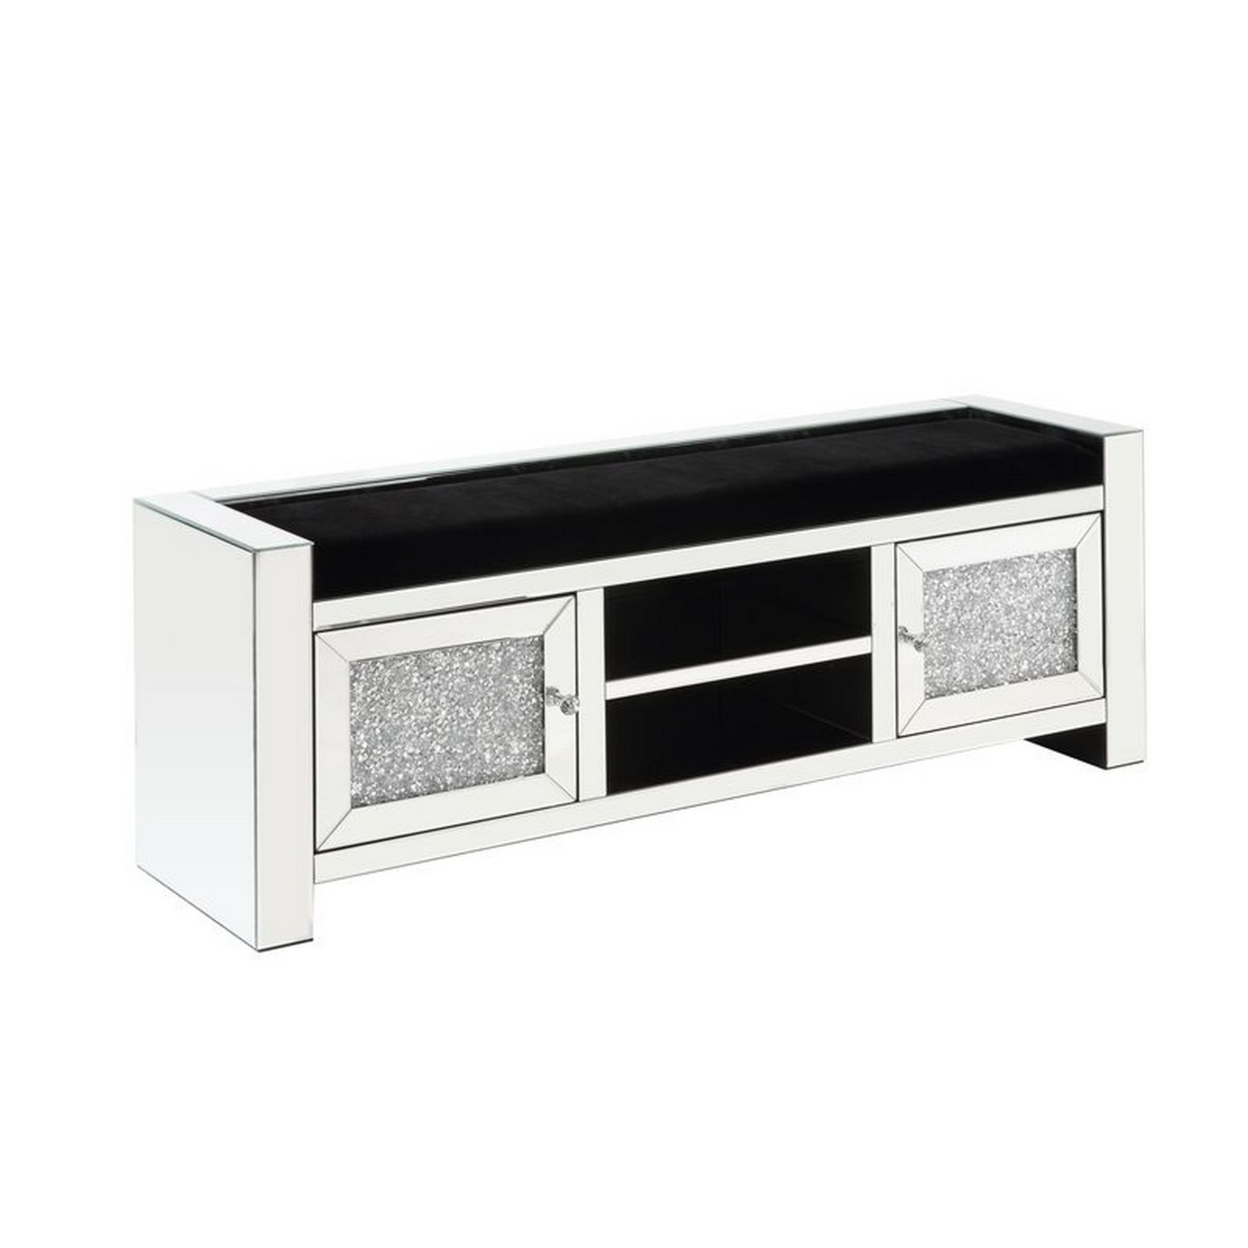 Mirrored Bench With Faux Diamonds And 2 Door Cabinets, Silver- Saltoro Sherpi